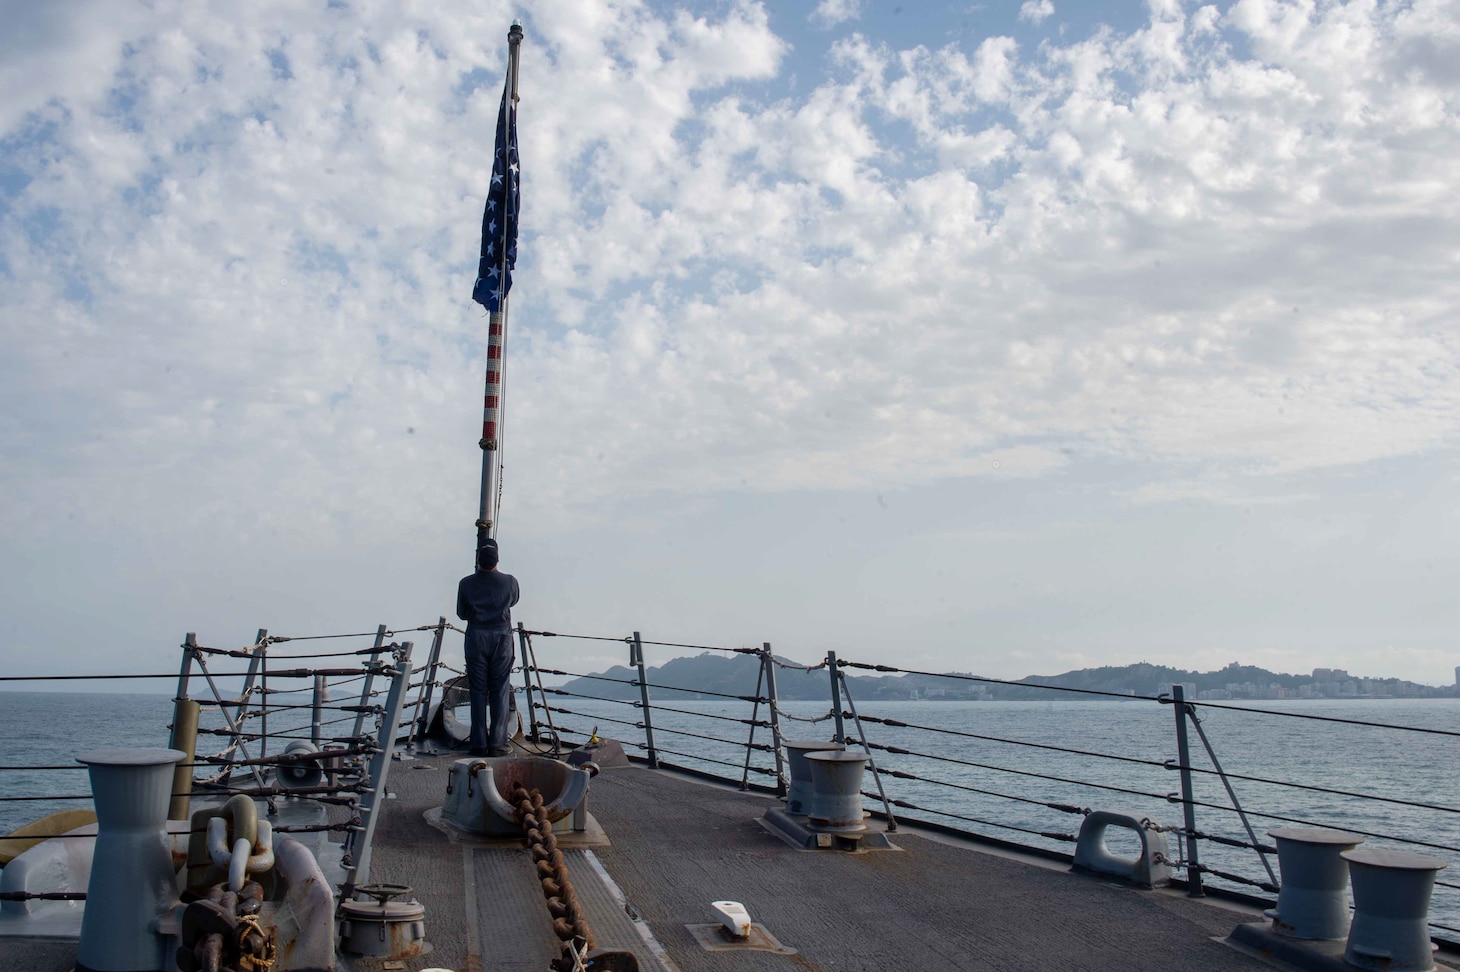 Logistics Specialist 3rd Class Matthew Haggerty, from Wayngott, Michigan, raises the Union Jack during morning colors aboard the Arleigh Burke-class guided-missile destroyer USS Jason Dunham (DDG 109), while anchored for a port visit in Durres, Albania, May 29, 2022.